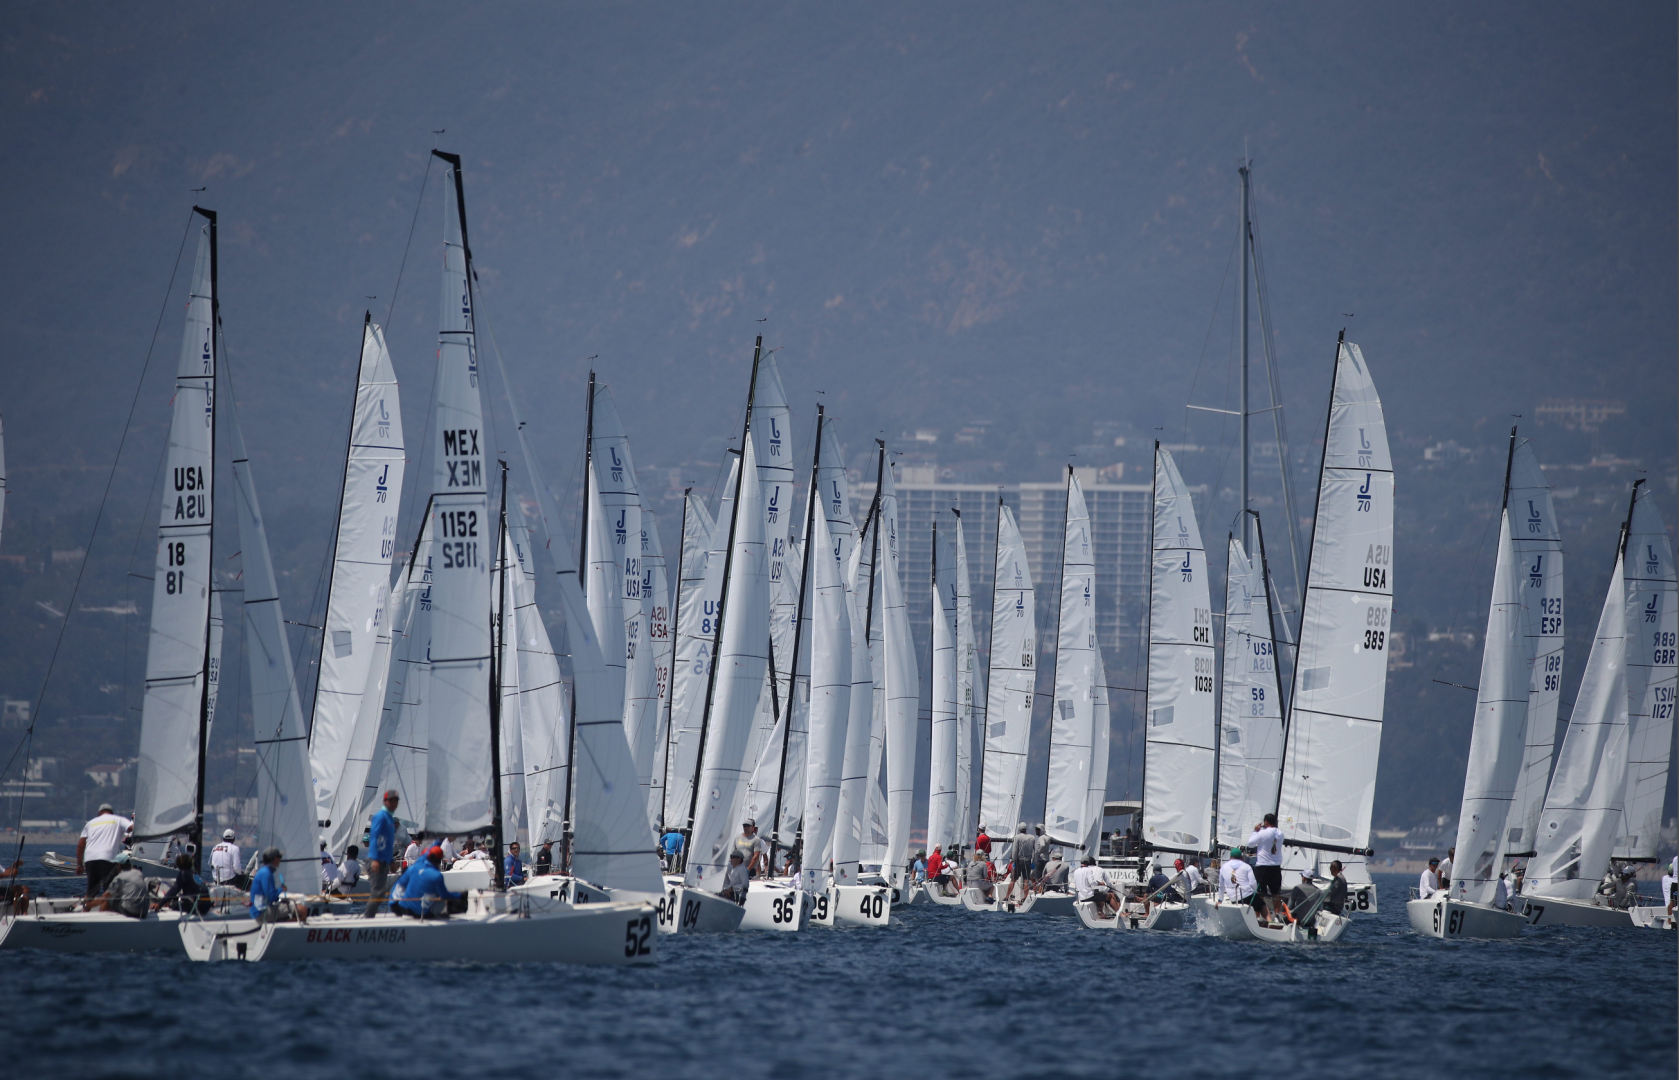 Waiting for Championship conditions at J/70 worlds at California YC